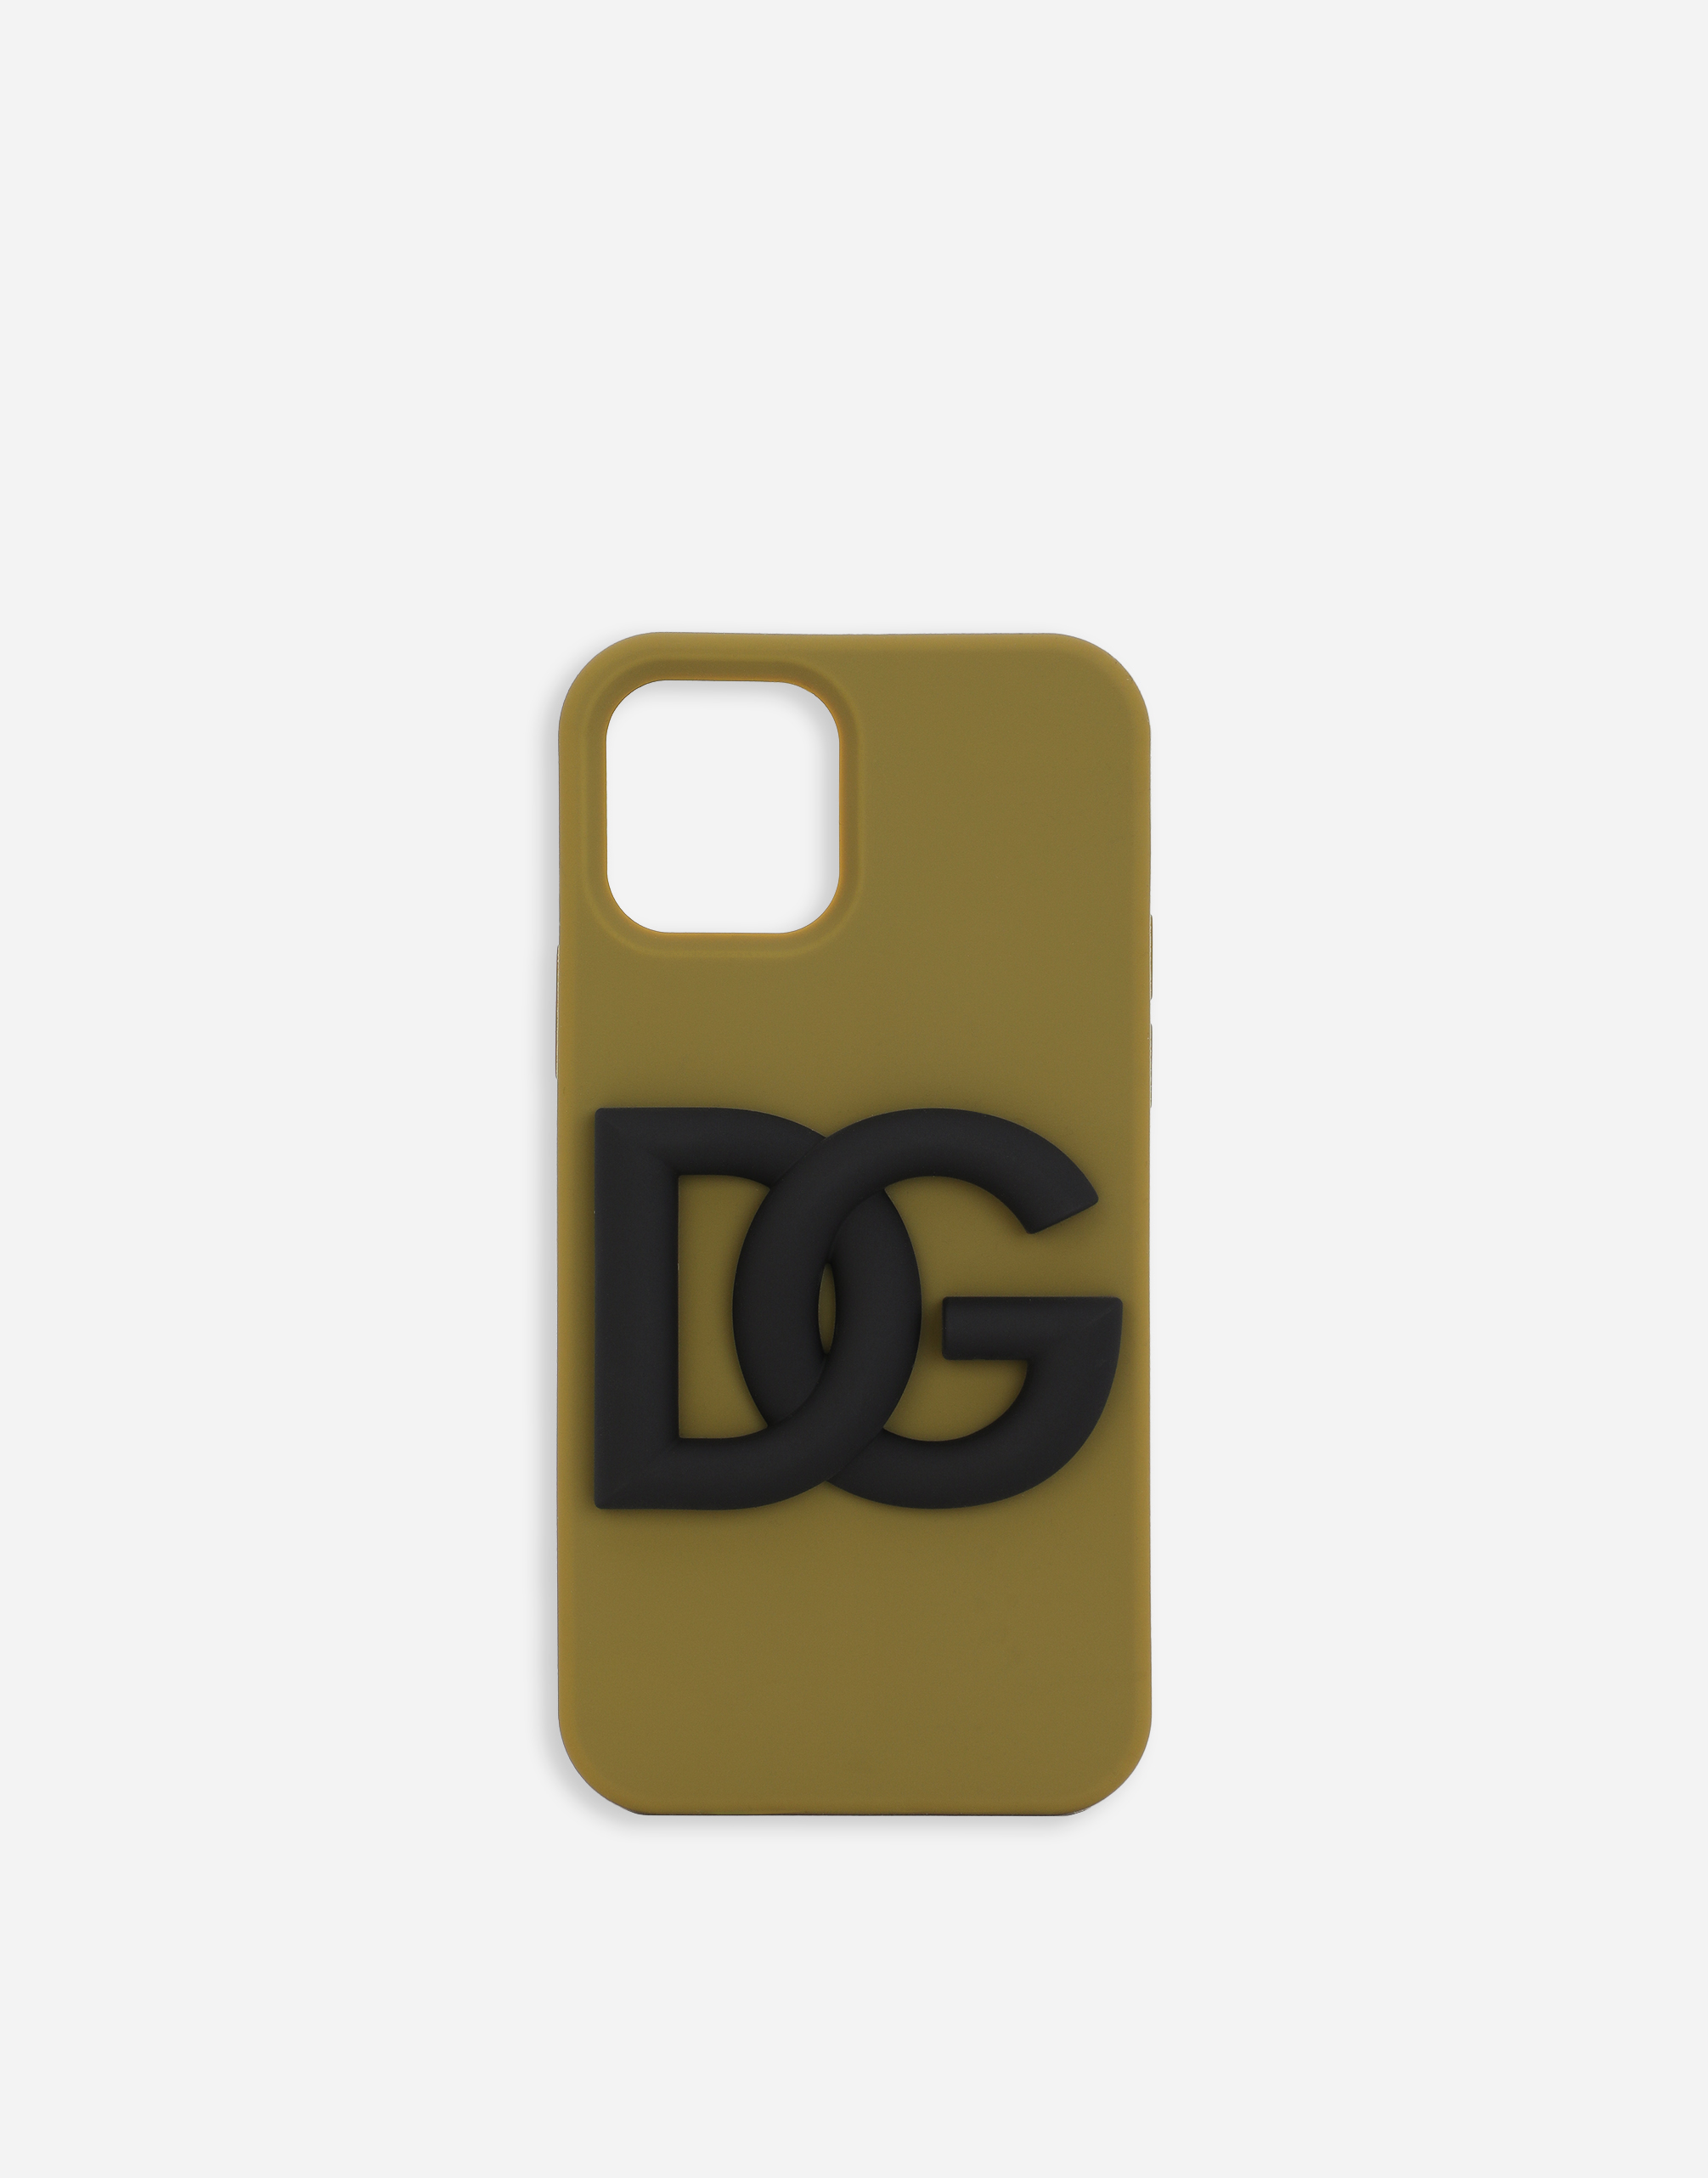 Rubber iPhone 12 Pro cover with DG logo in Multicolor